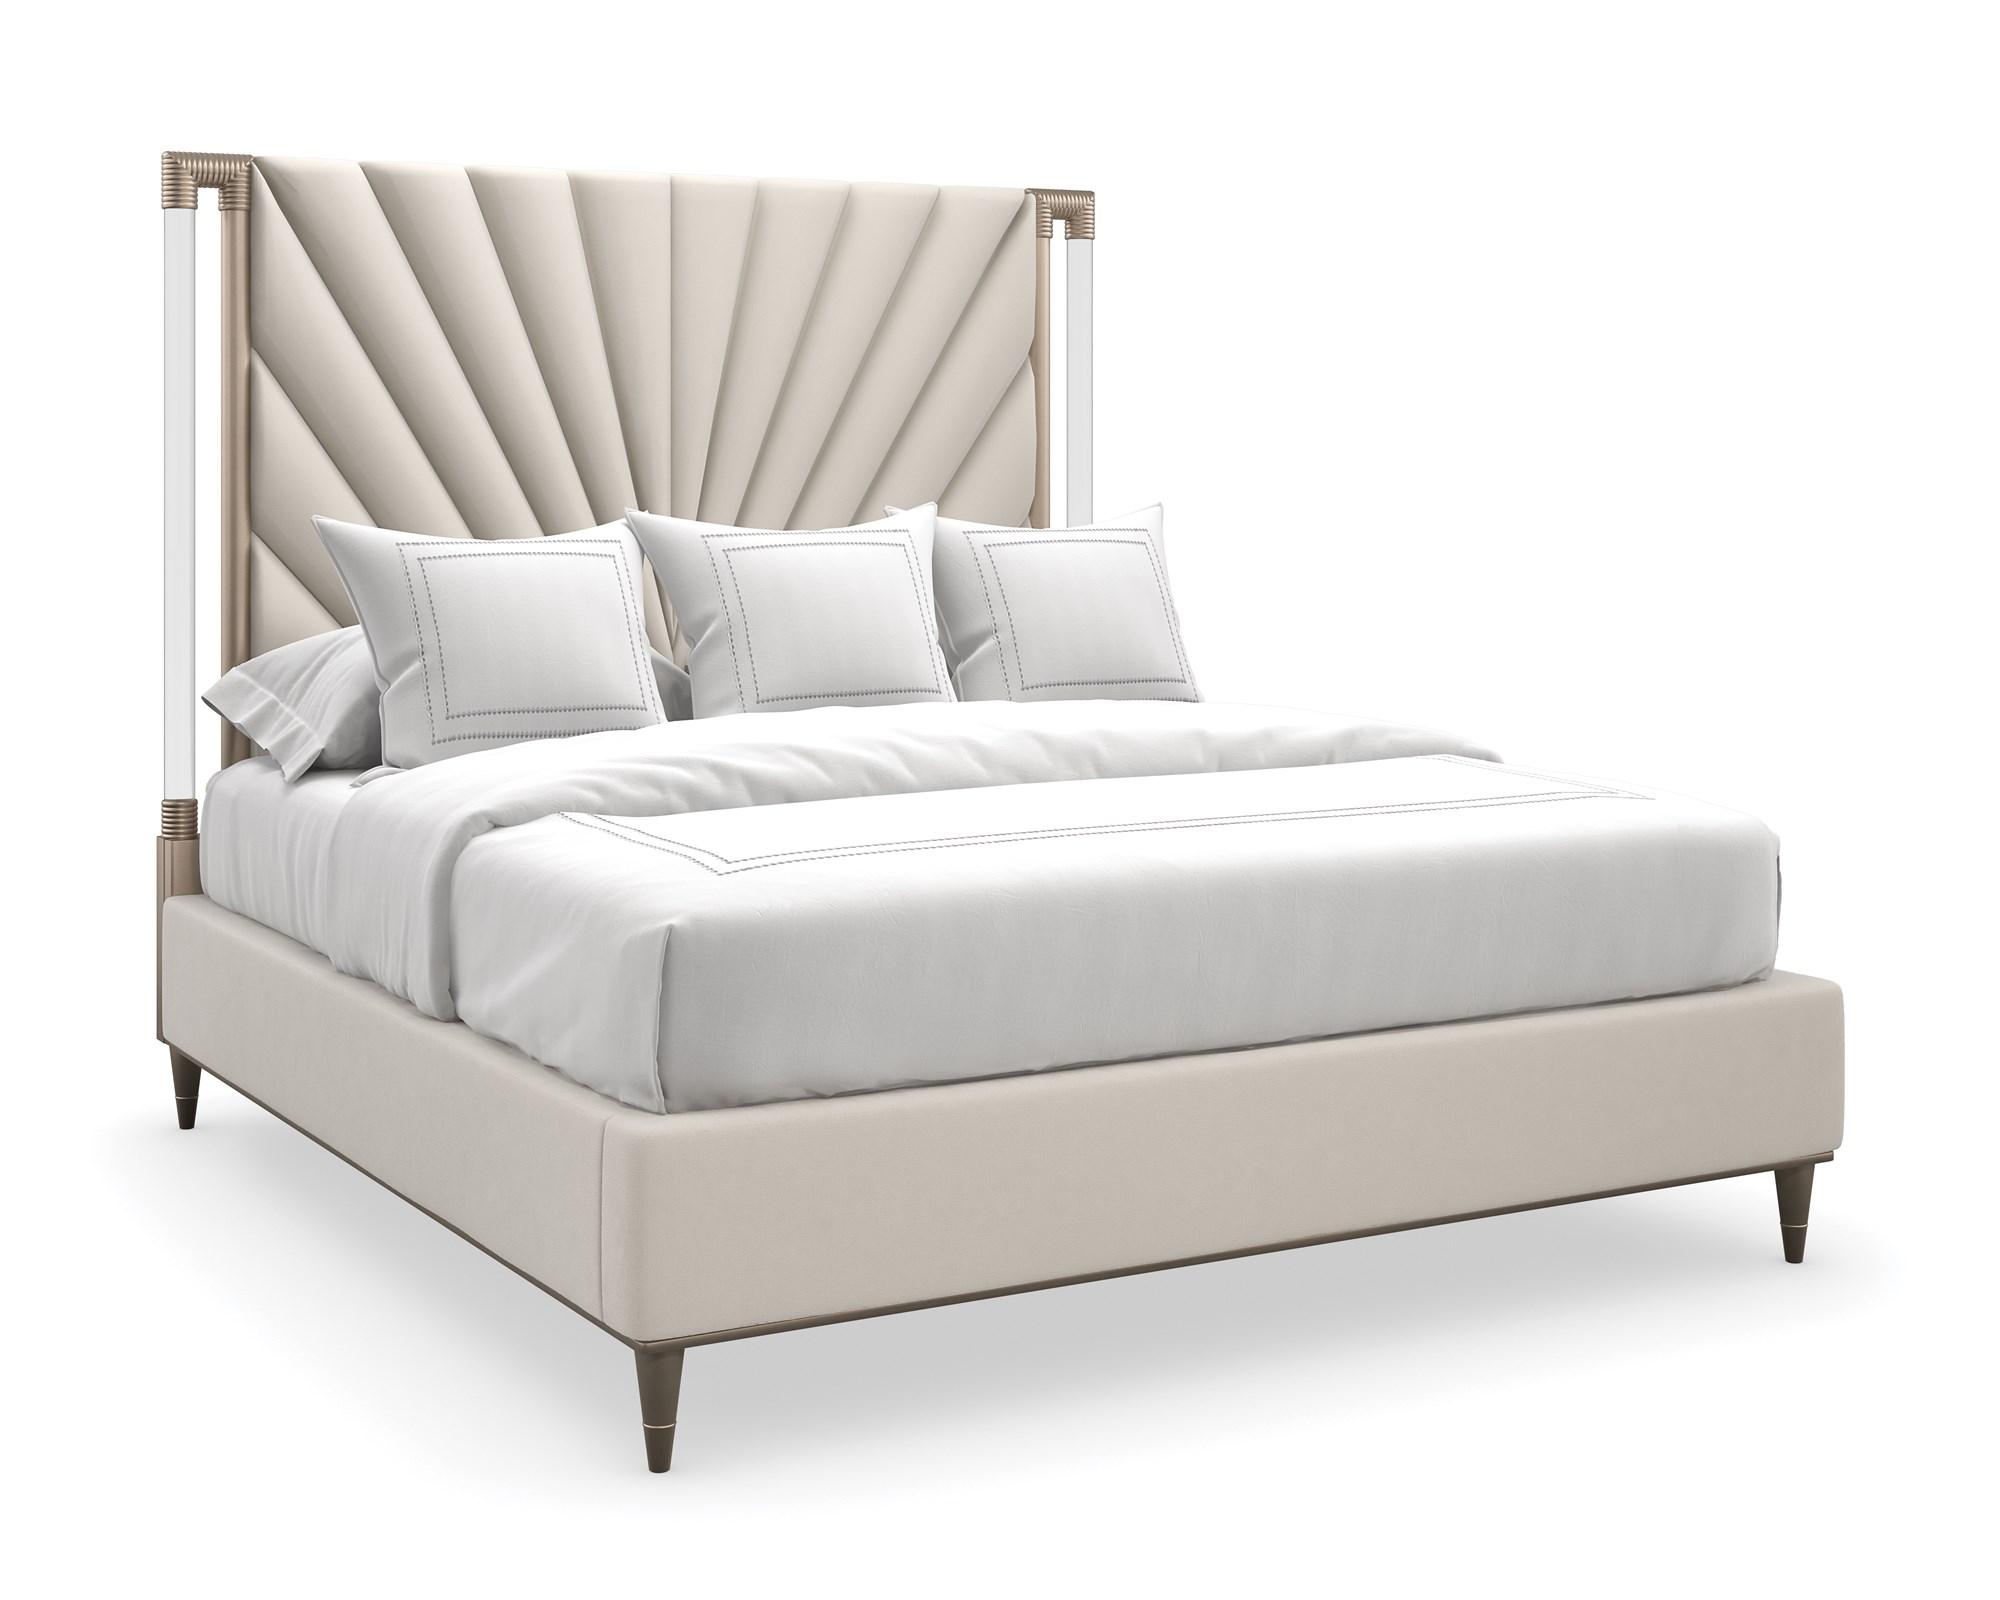 Contemporary Platform Bed VALENTINA UPH QUEEN BED C113-422-101 in Pearl, Gold Fabric